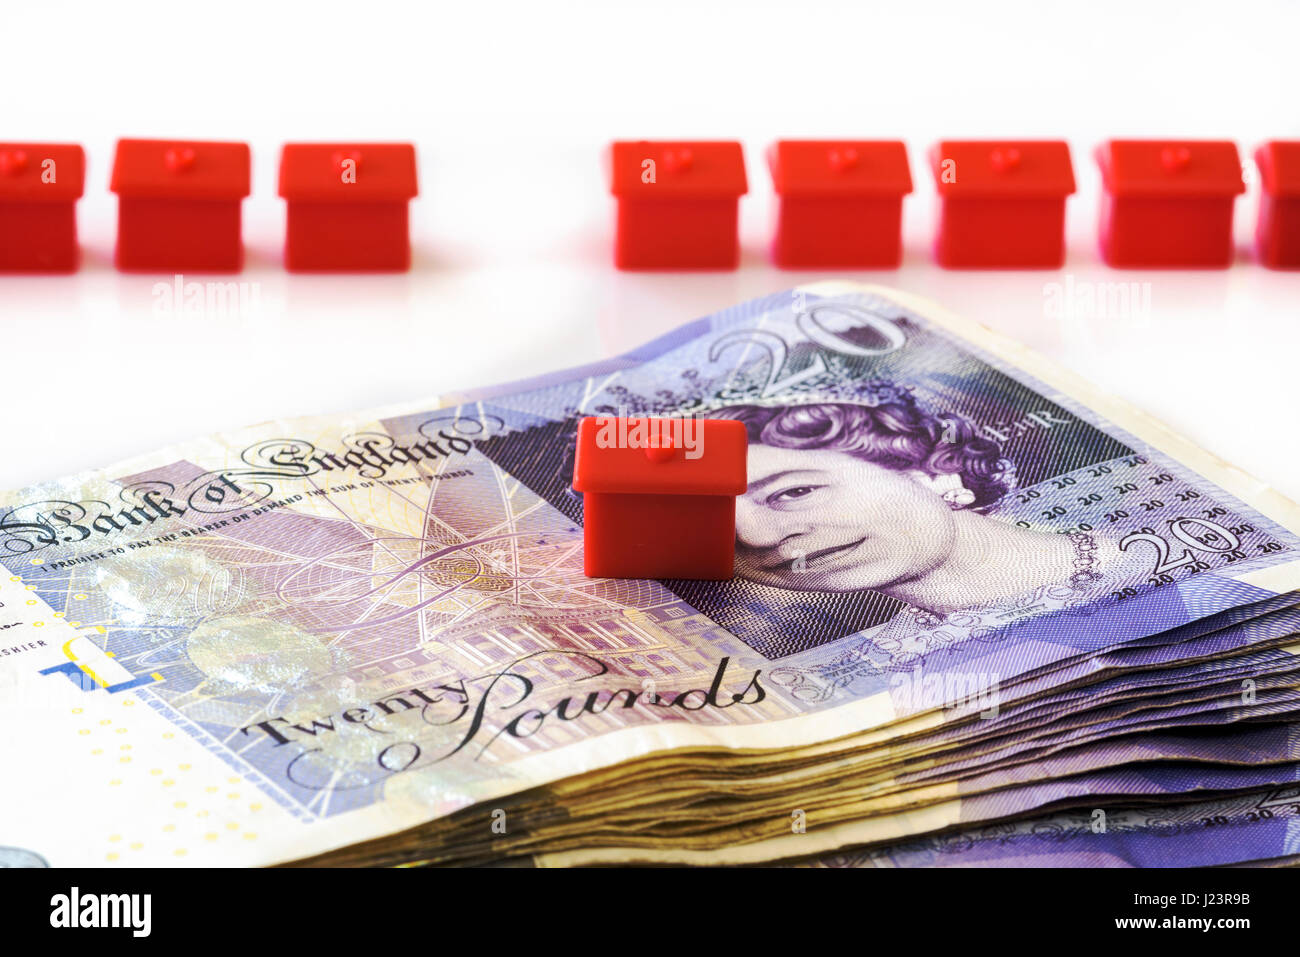 Row of monopoly houses and cash.Trying to get on the property ladder, unaffordable homes. Stock Photo